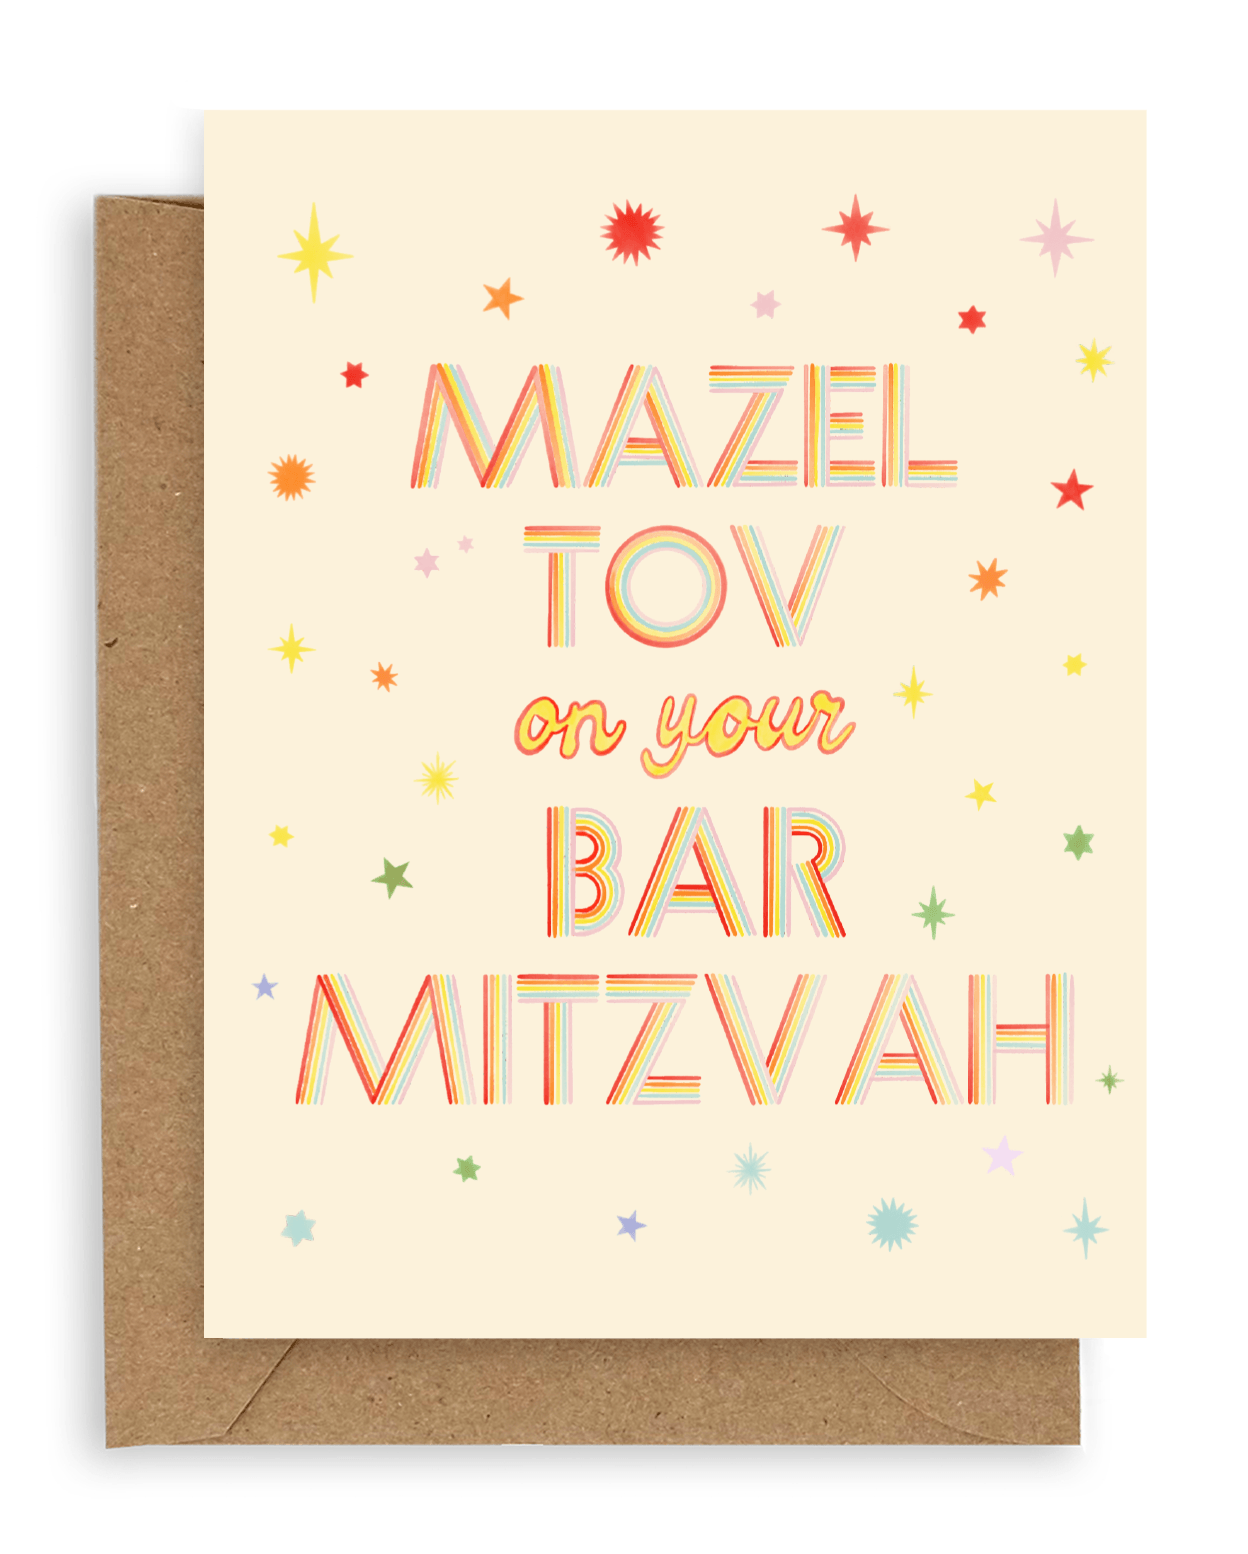 Rainbow stars surround the words &quot;Mazel tov on your bar mitzvah&quot; in multi-color font printed on a cream background. Shown with kraft envelope. 